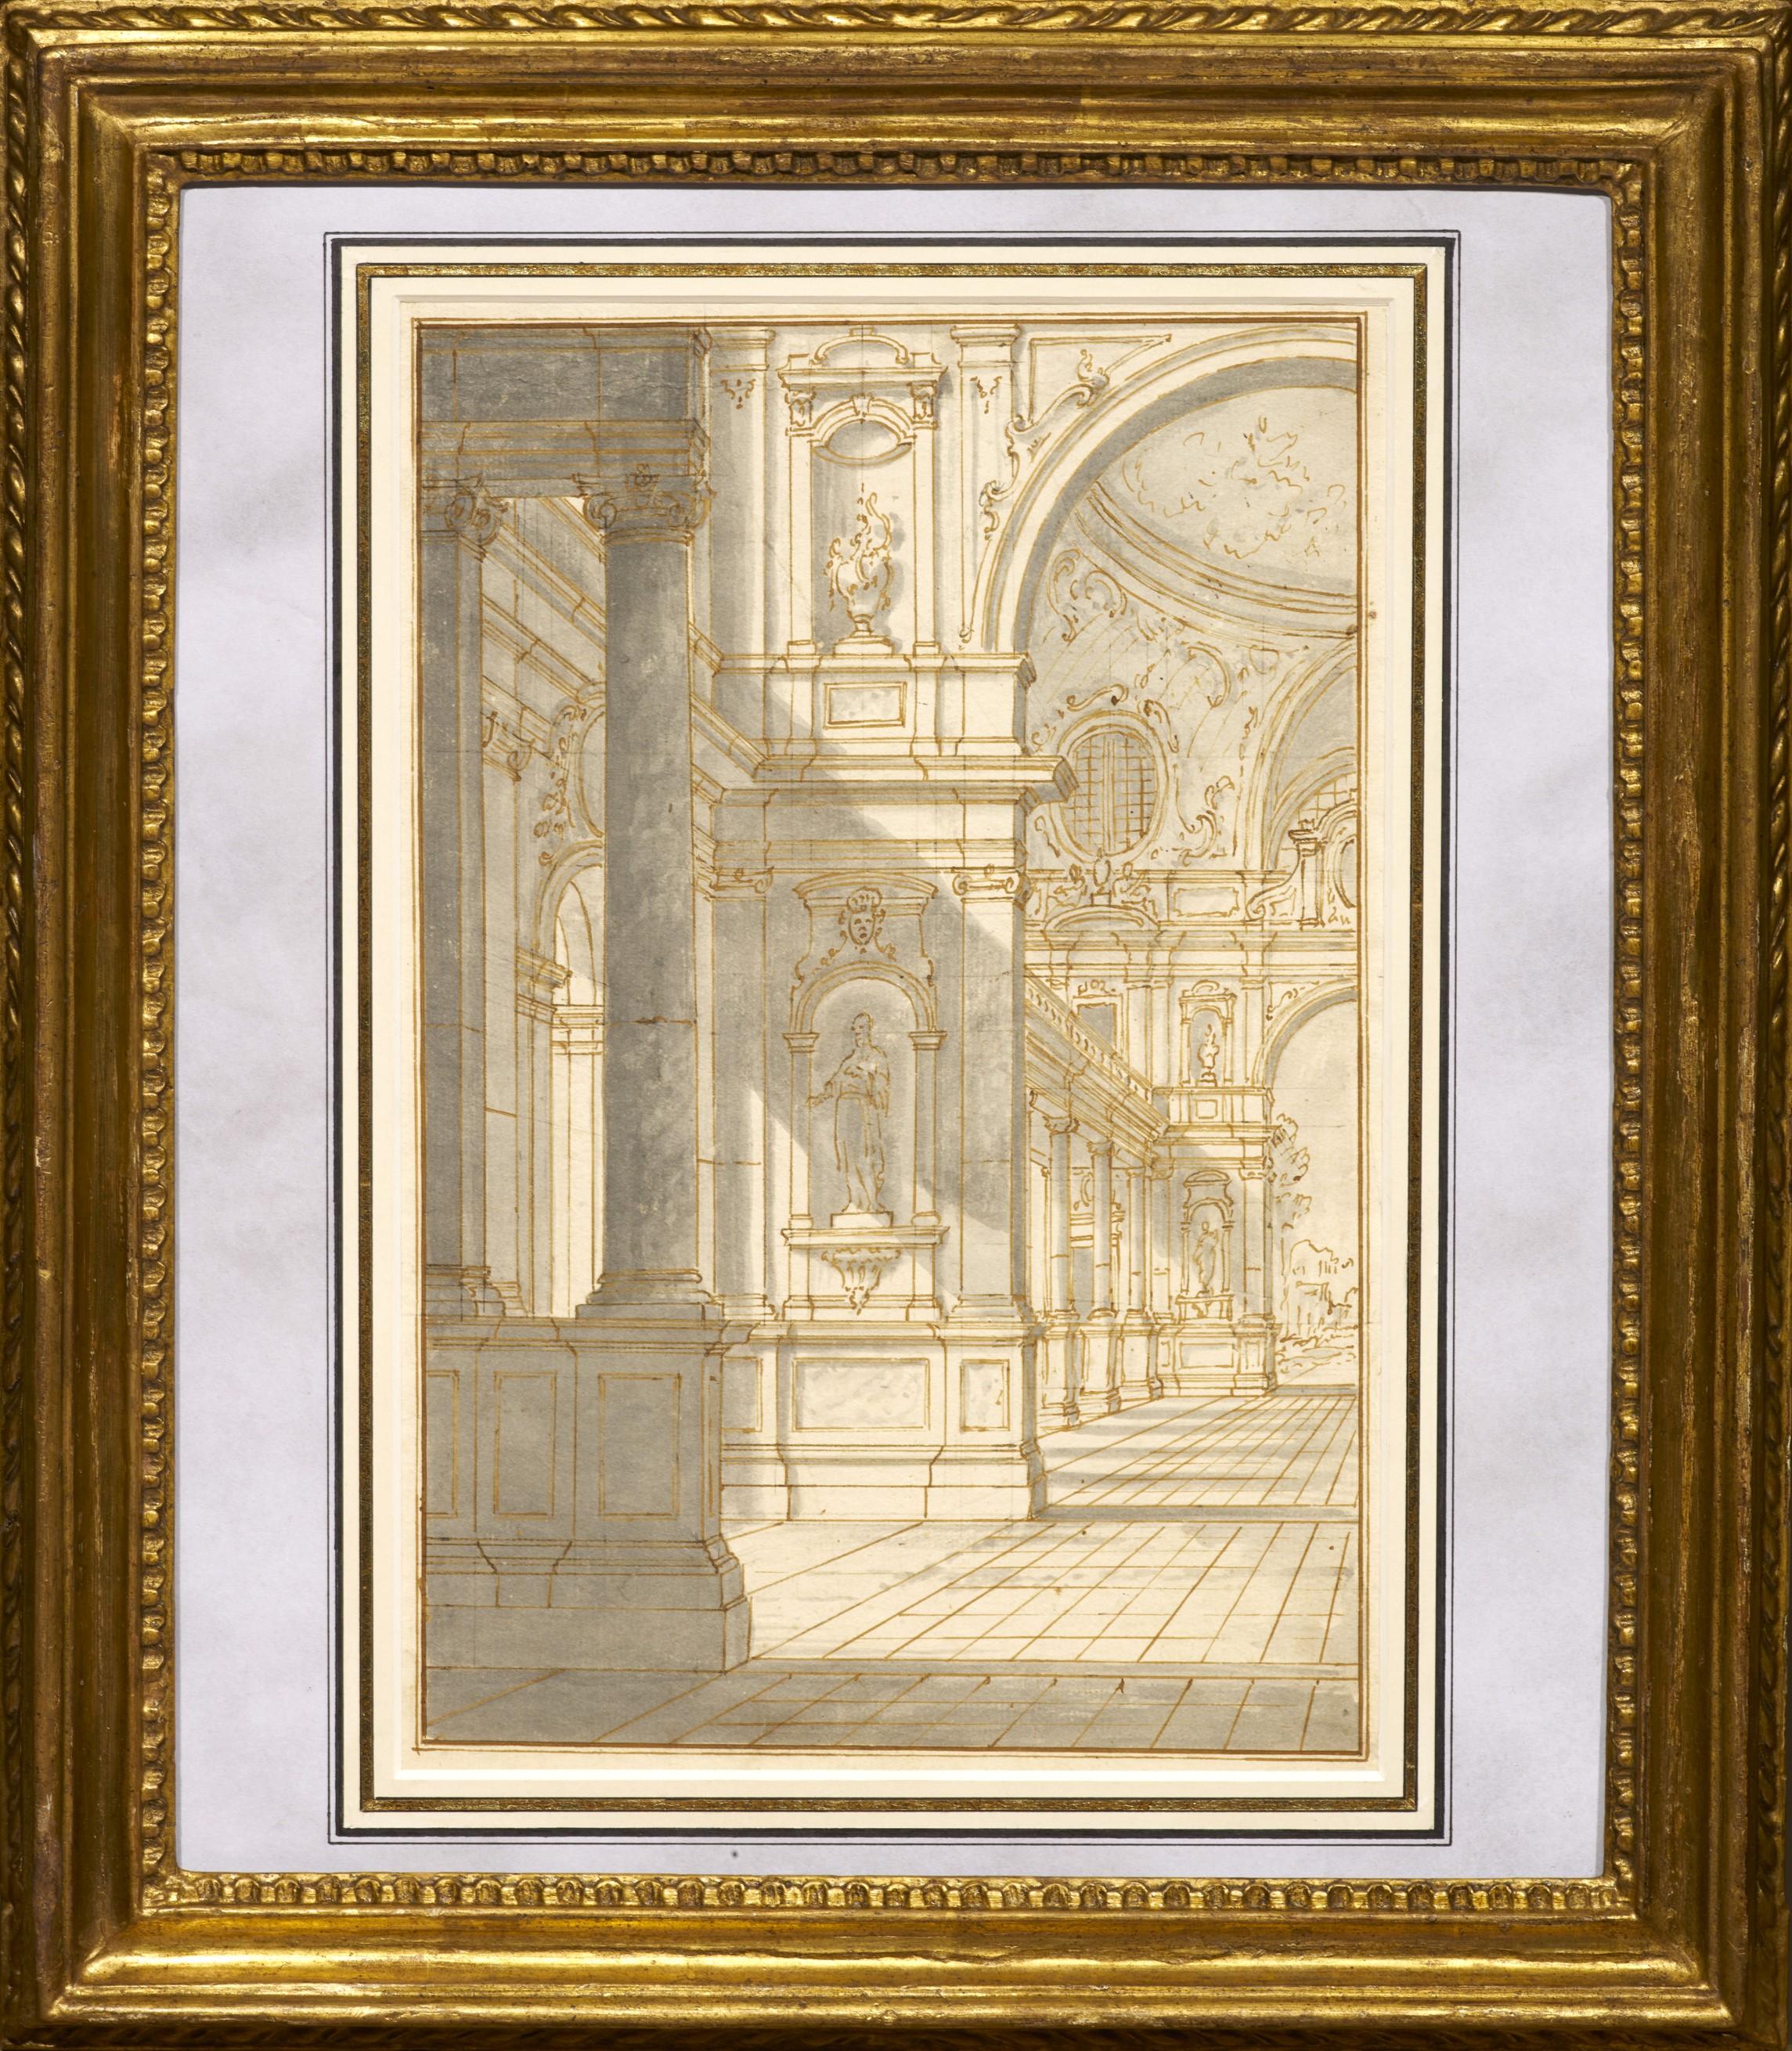 The technique of this luminous architectural drawing with its rigorous perspective is perfectly representative of the creations of the Venetian school’s 18th century vedutists. Similar drawings support its attribution to Francesco Battaglioli.

Iron